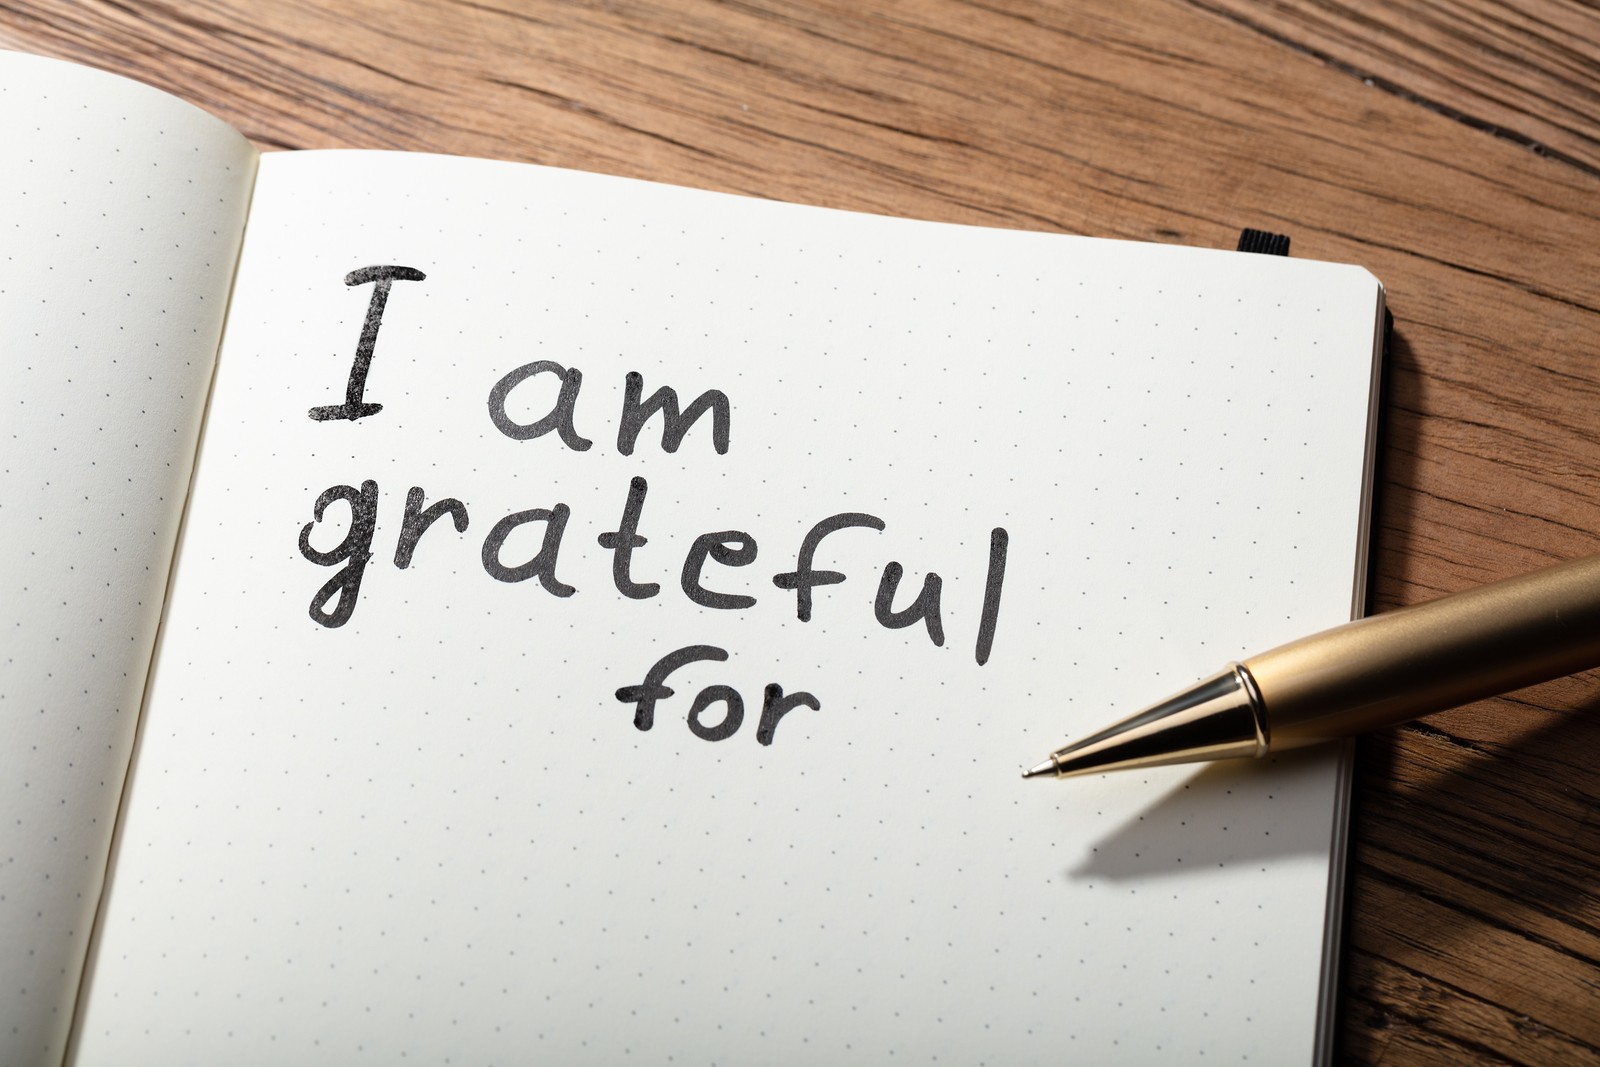 Notebook and pen with writing on it that says, "I am grateful for..." 